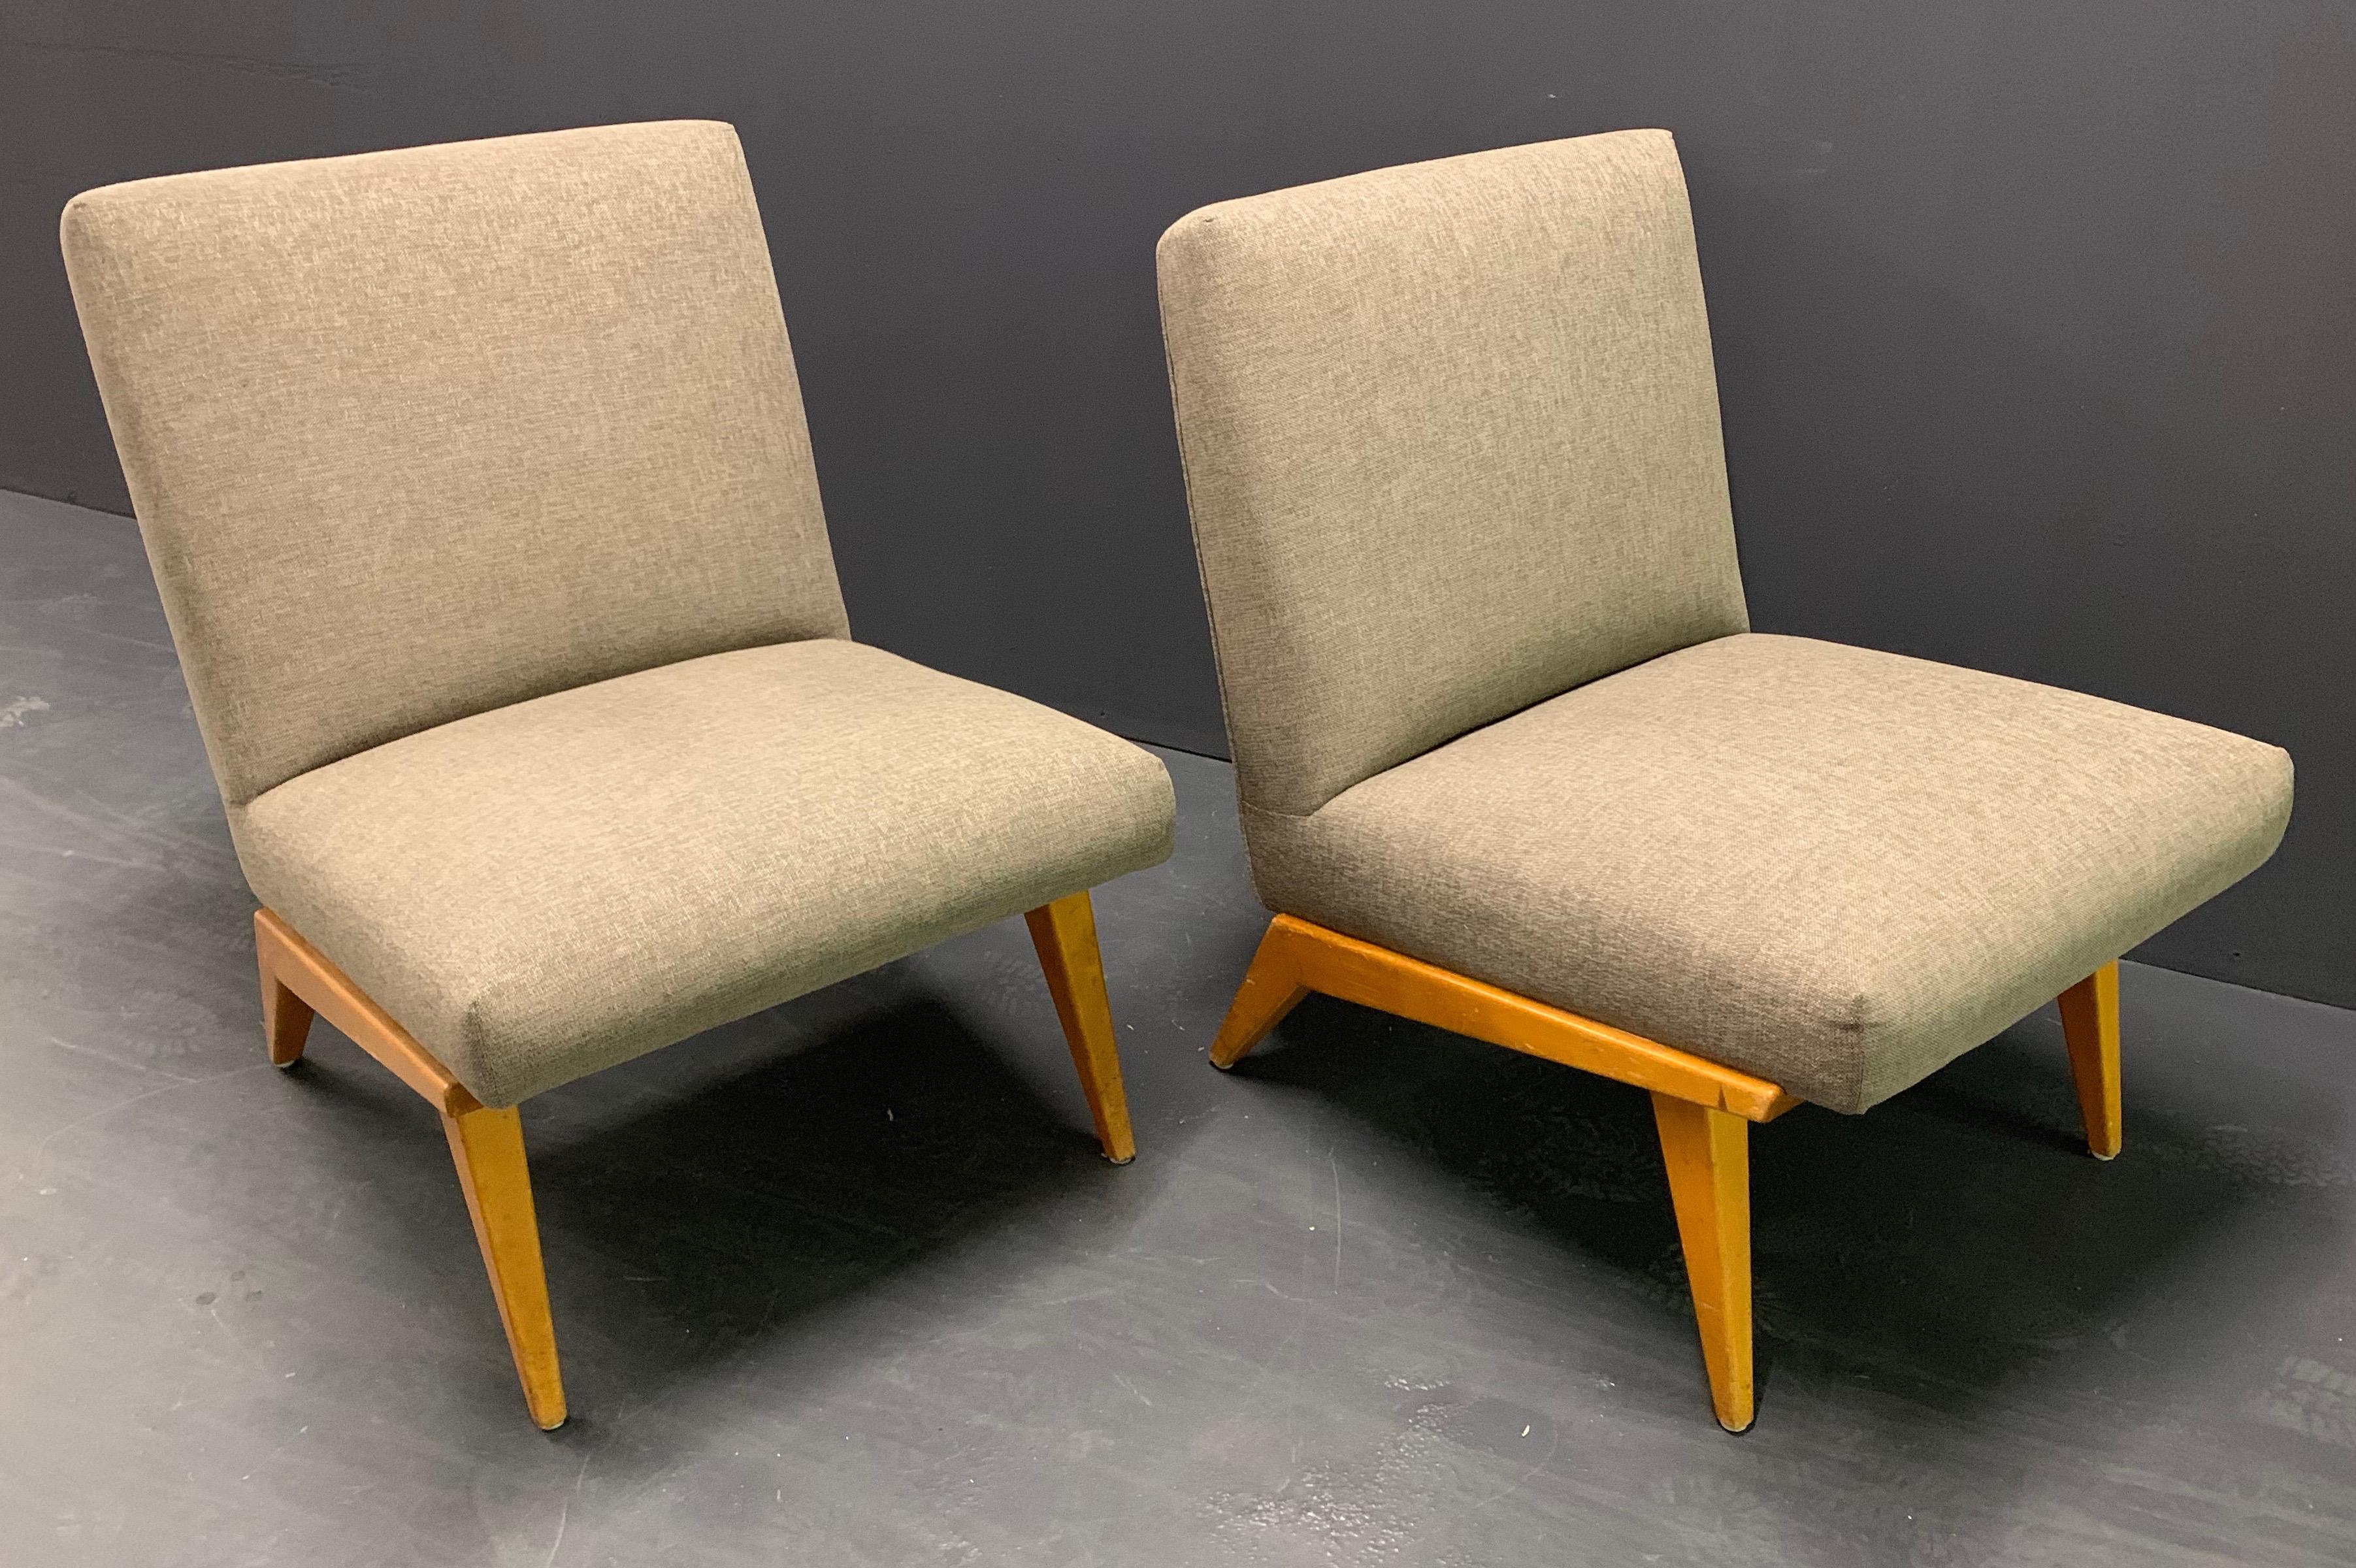 Fabric Rare Set of Two No.21 Lounge Chairs by Jens Risom for Knoll